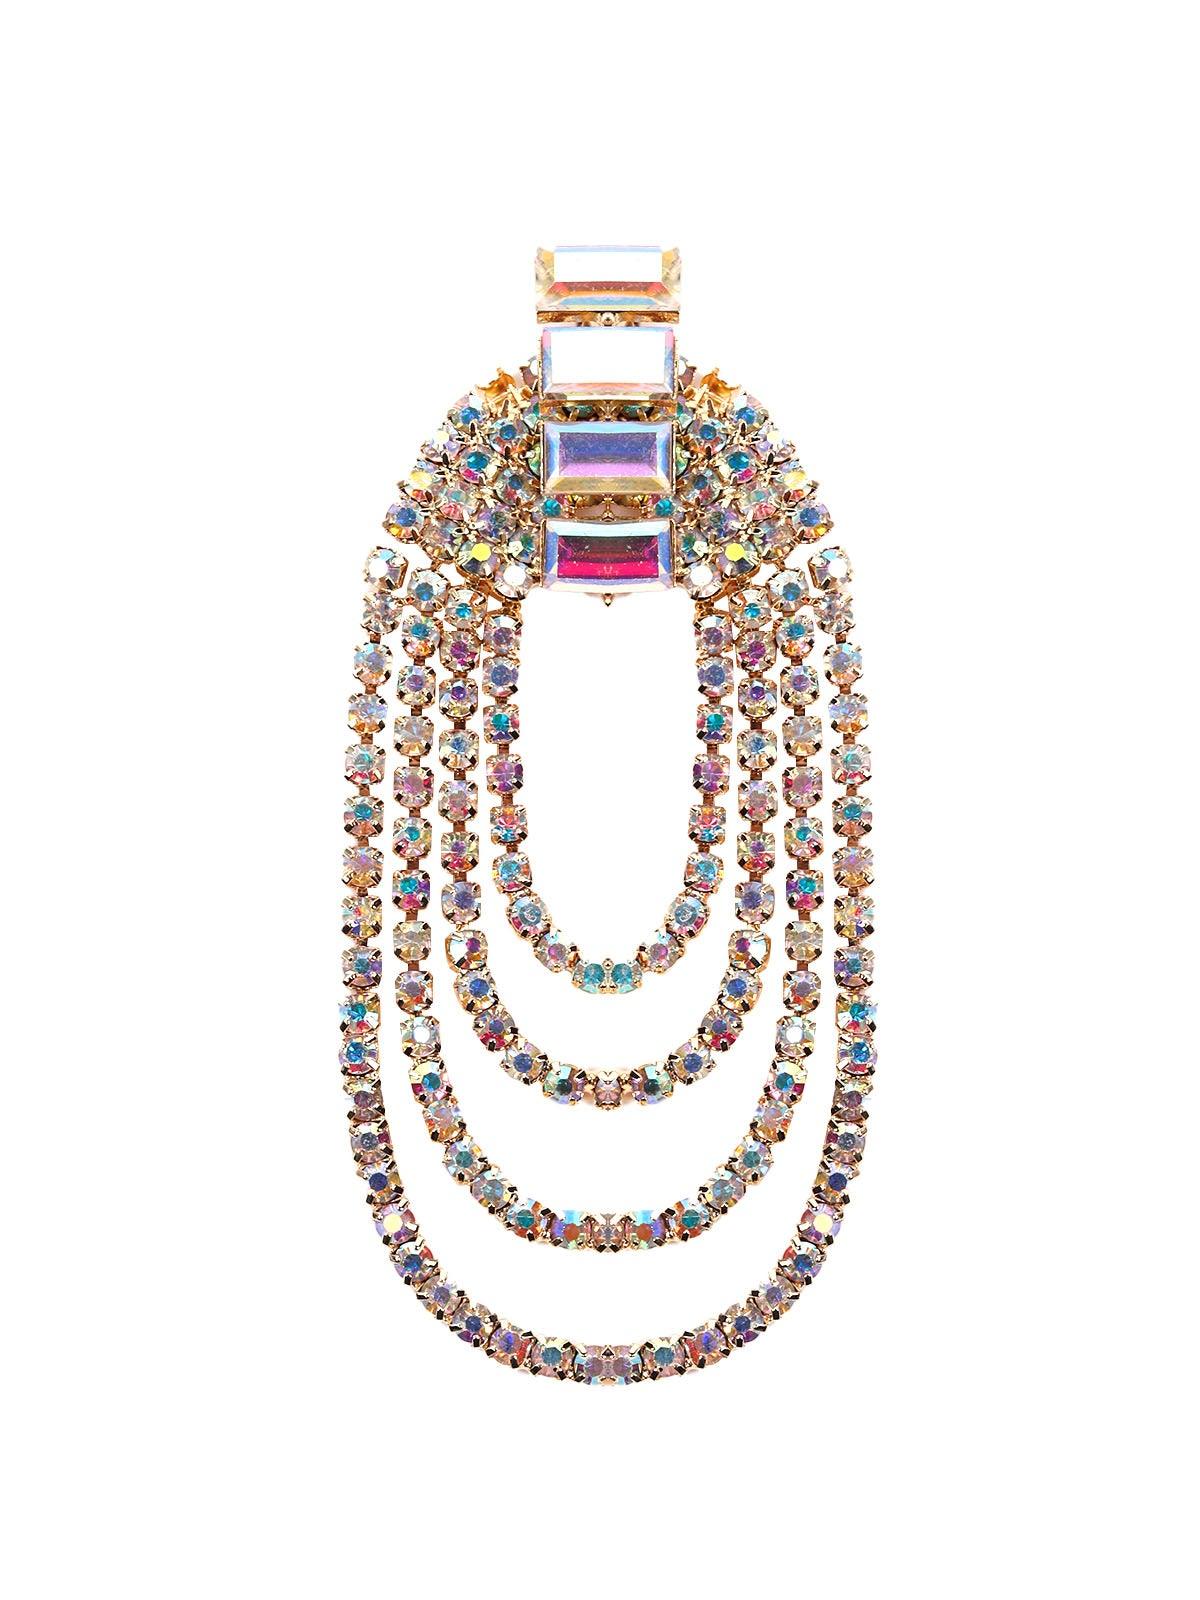 Women's Multilayered Overlapping Colourful Crystal Earrings - Odette